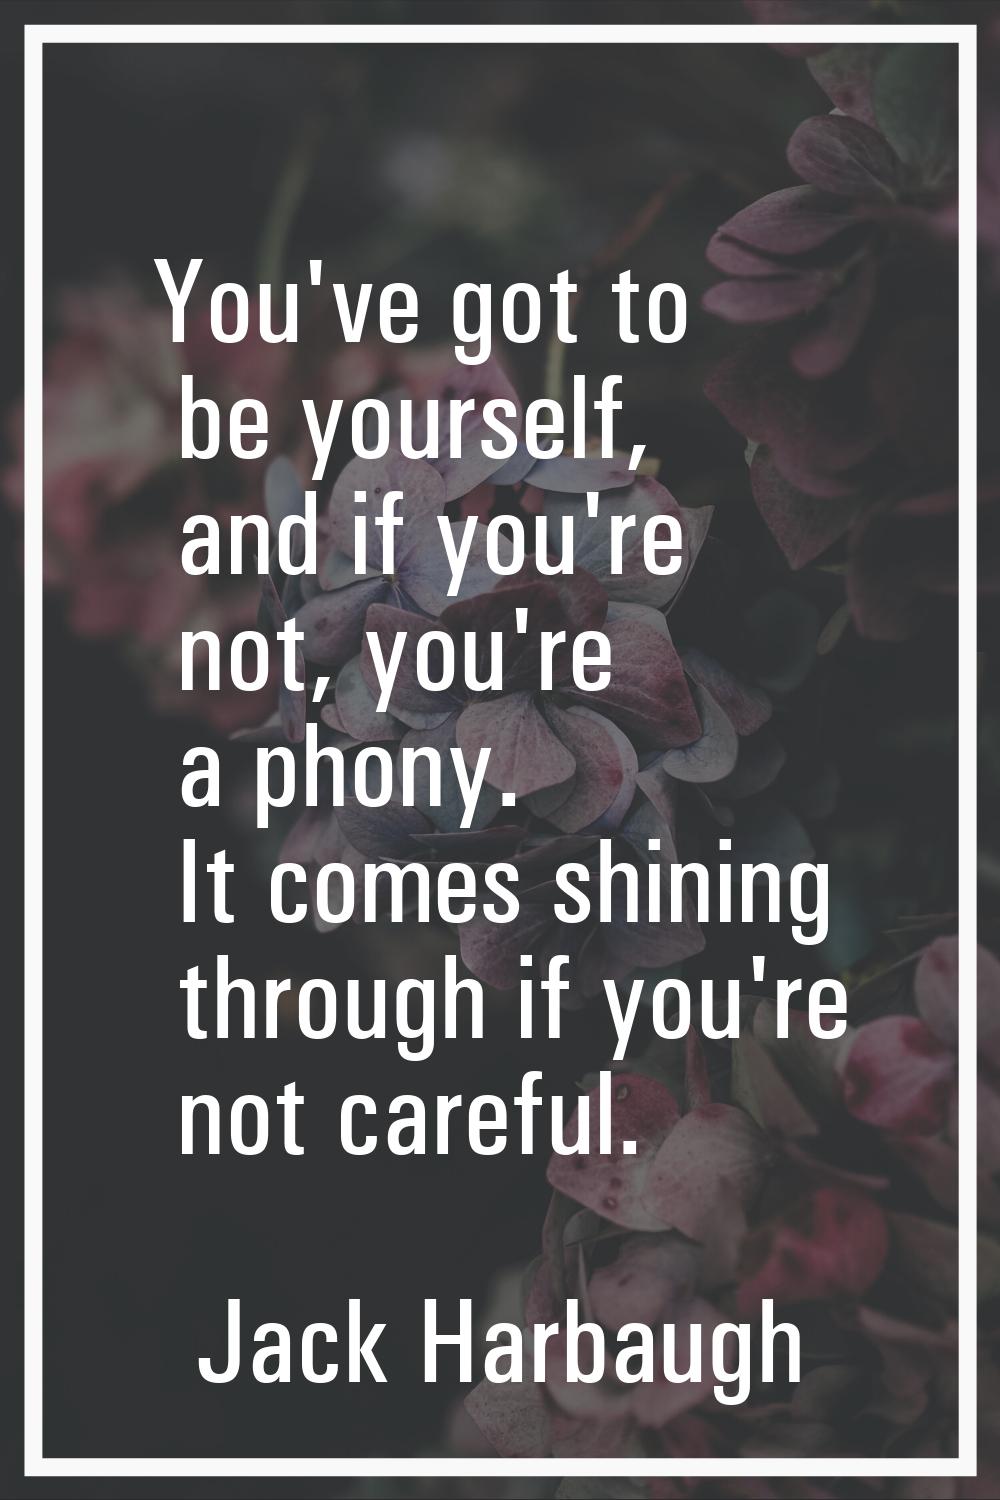 You've got to be yourself, and if you're not, you're a phony. It comes shining through if you're no